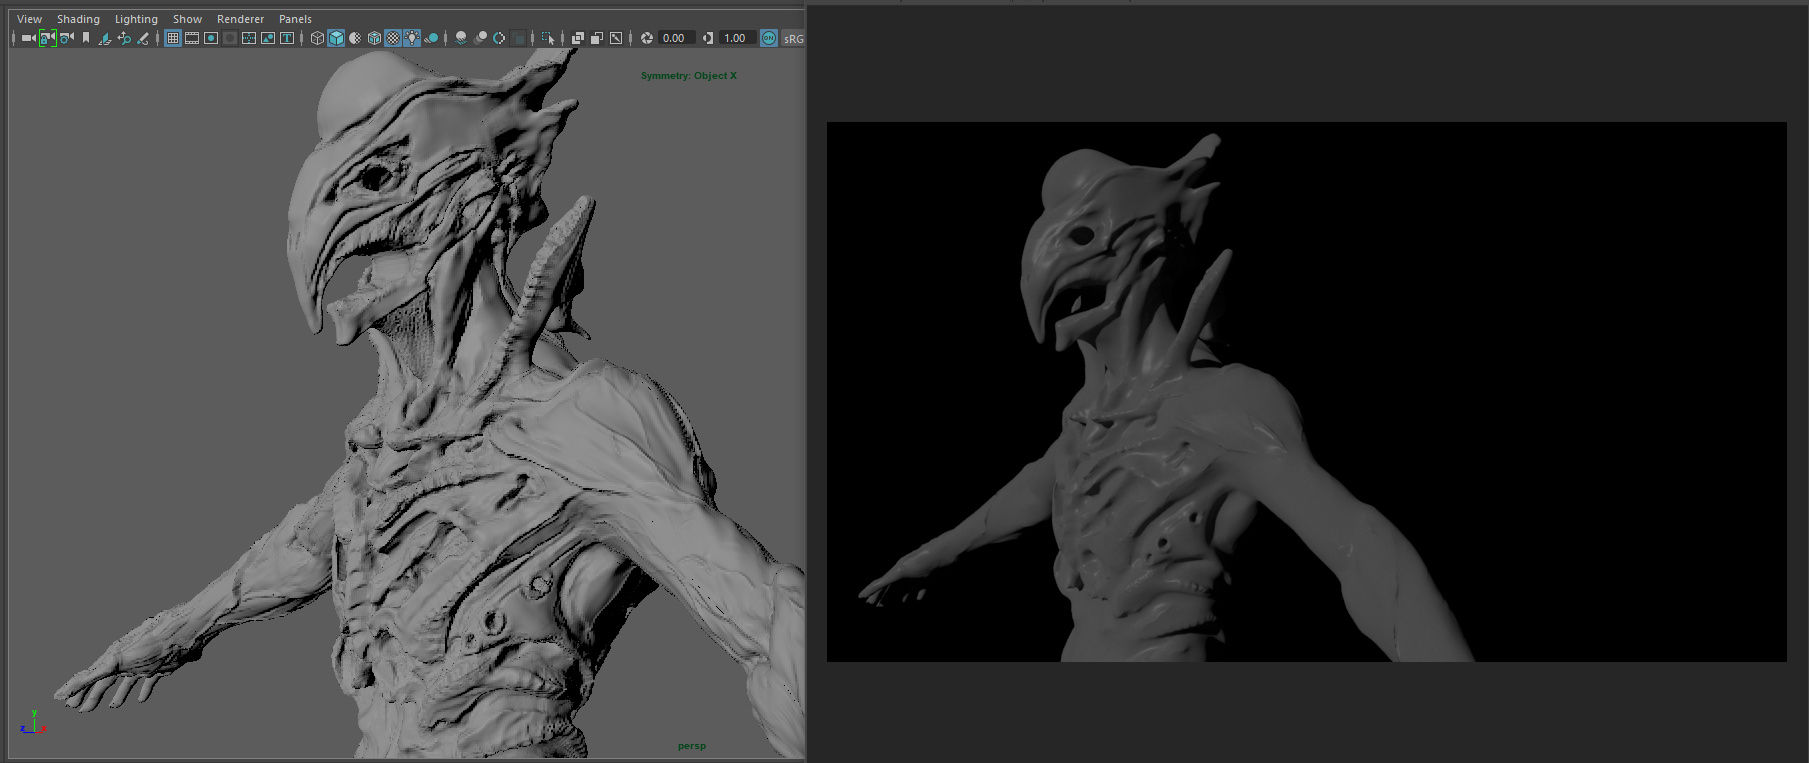 different axis center zbrush vs maya 4r8